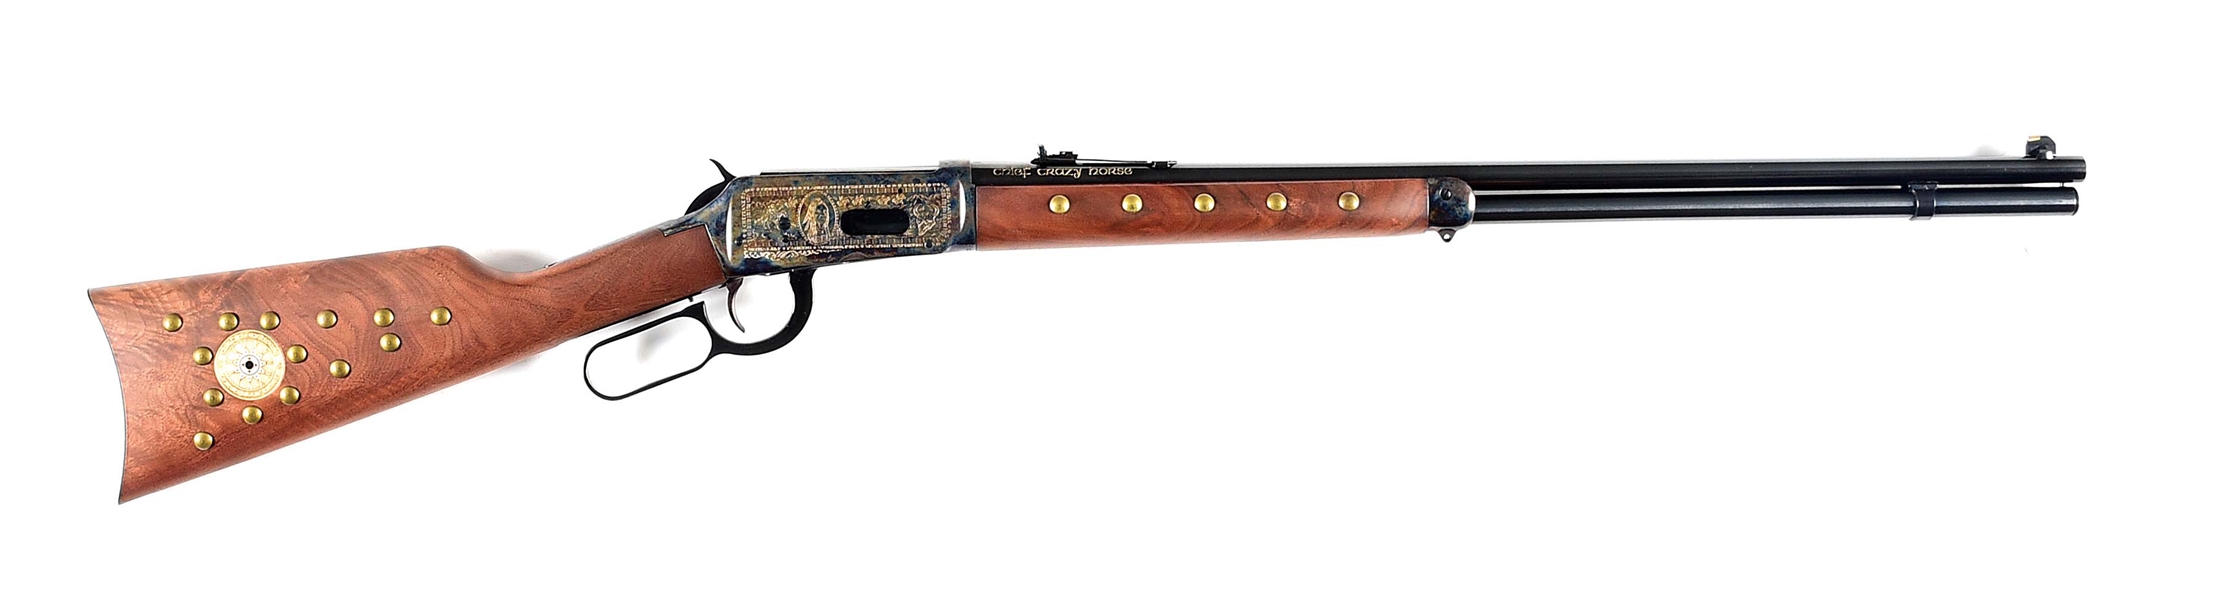 (M) WINCHESTER MODEL 94 CHIEF CRAZY HORSE COMMEMORATIVE LEVER ACTION RIFLE.